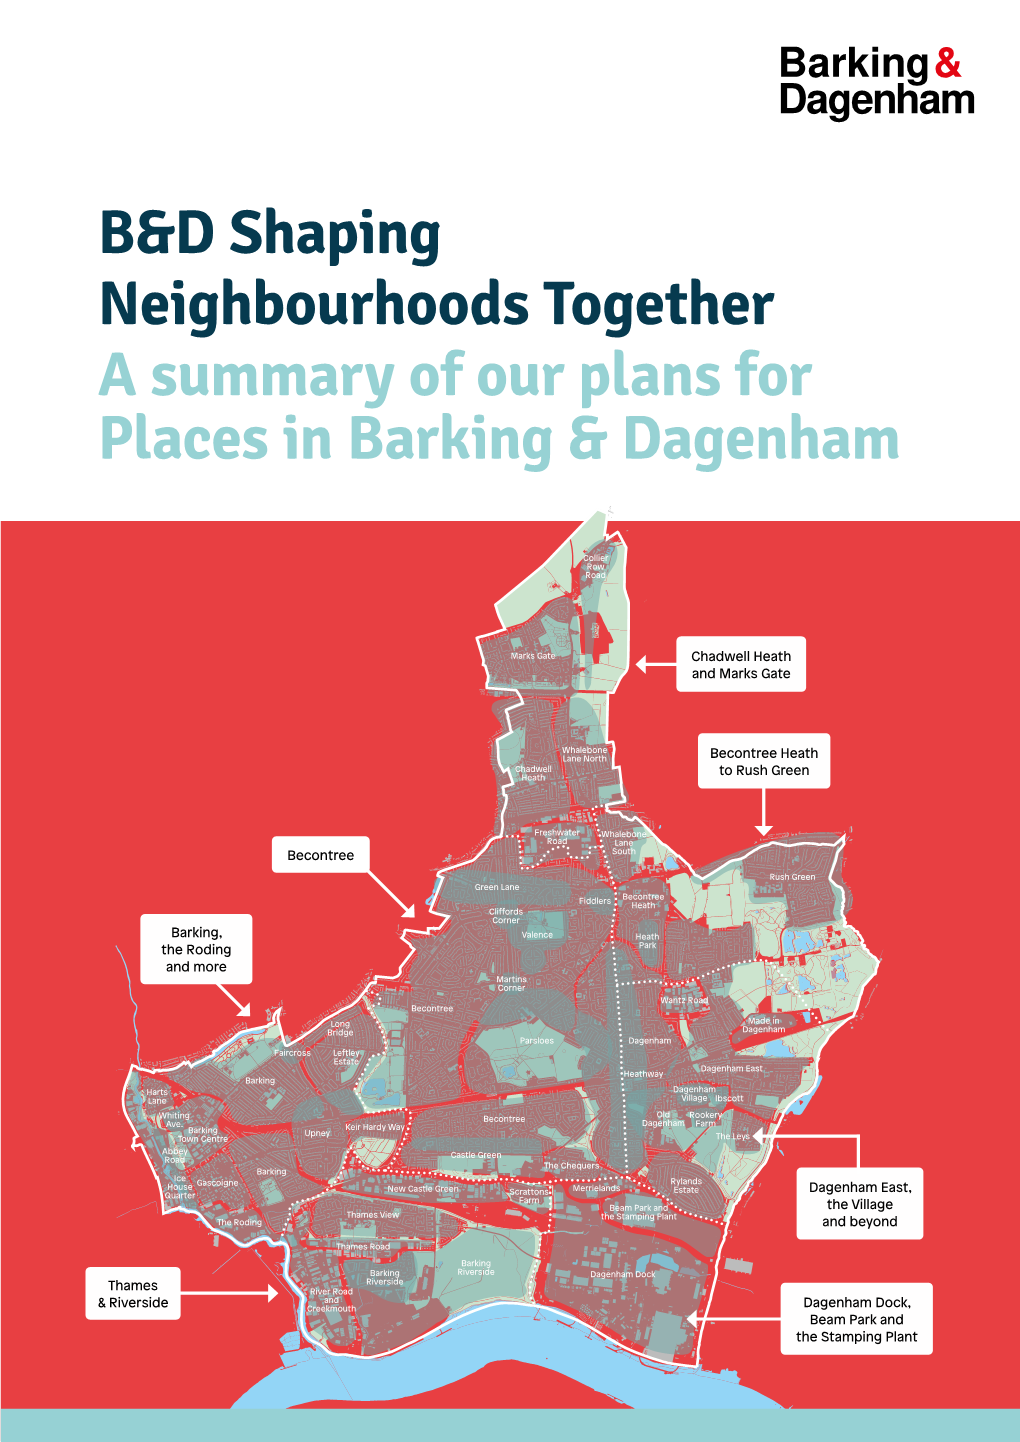 B&D Shaping Neighbourhoods Together a Summary of Our Plans